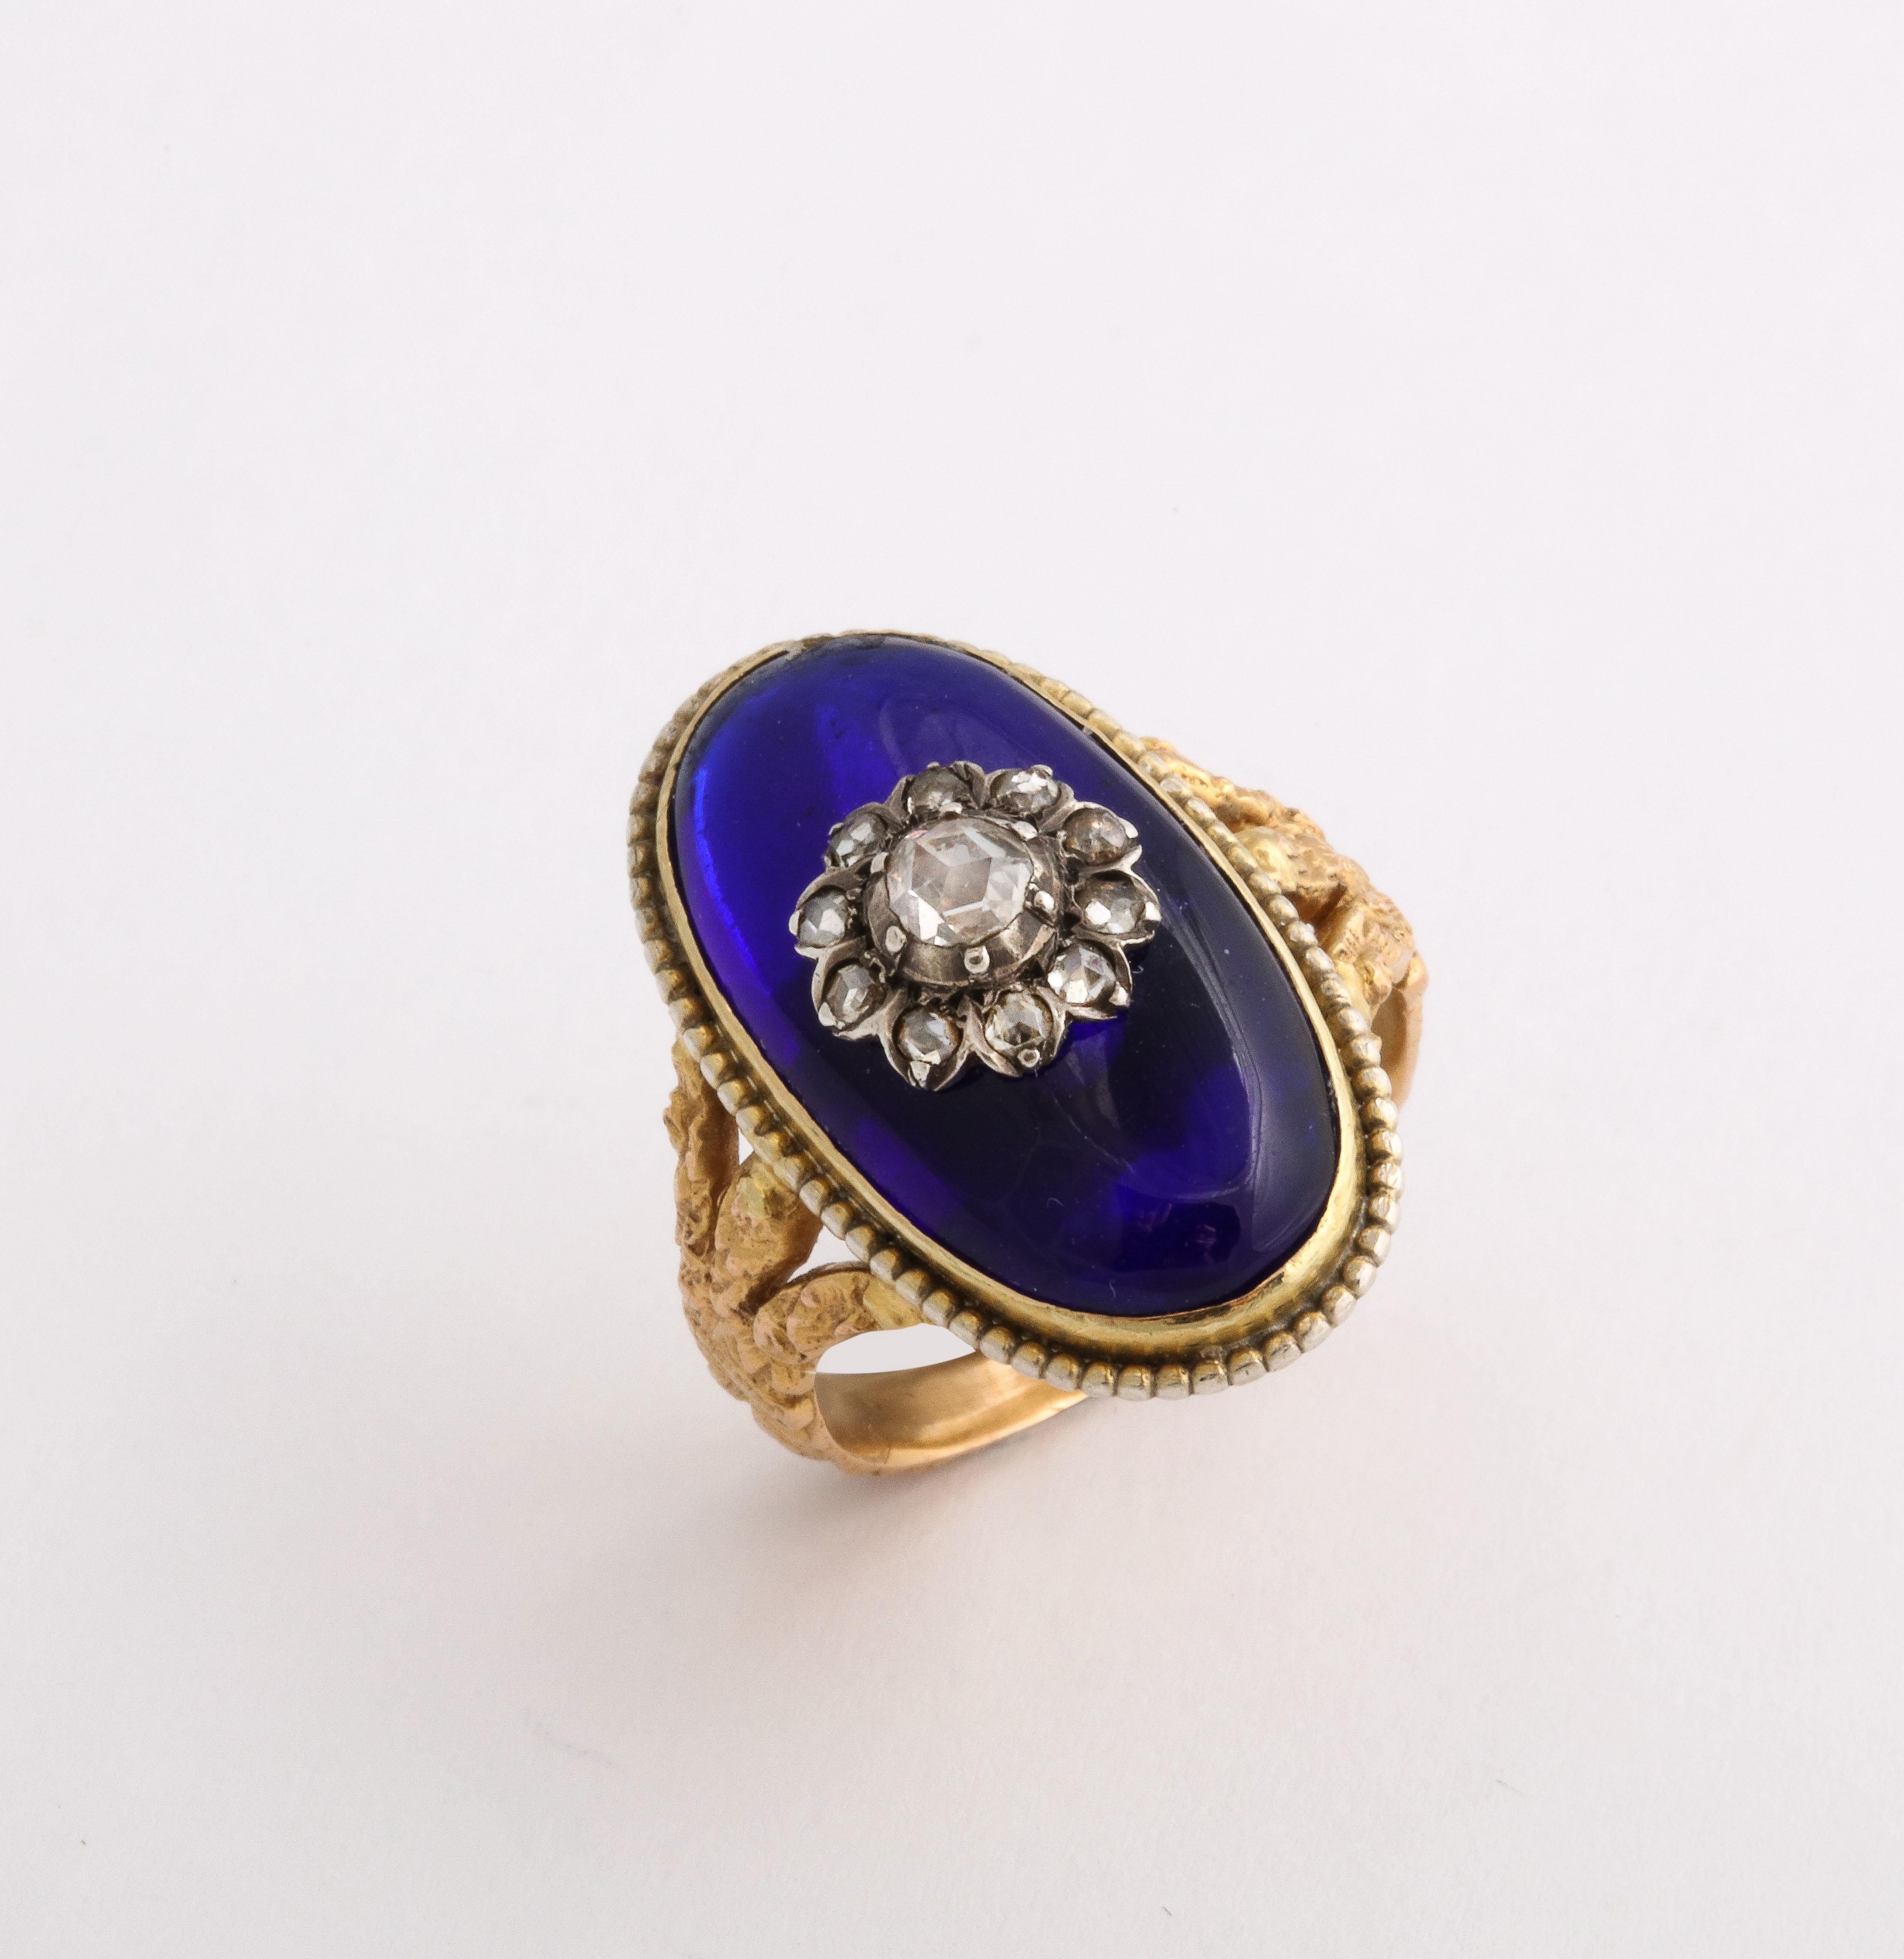 An outstanding Bristol Blue, almost neon Vitreous Glass Baque Au Firmament Ring in 18 Kt gold and sterling silver. NOTE, any marks on the ring are reflections of light. The ring is in excellent condition. Collectors and connoisseurs recognize the